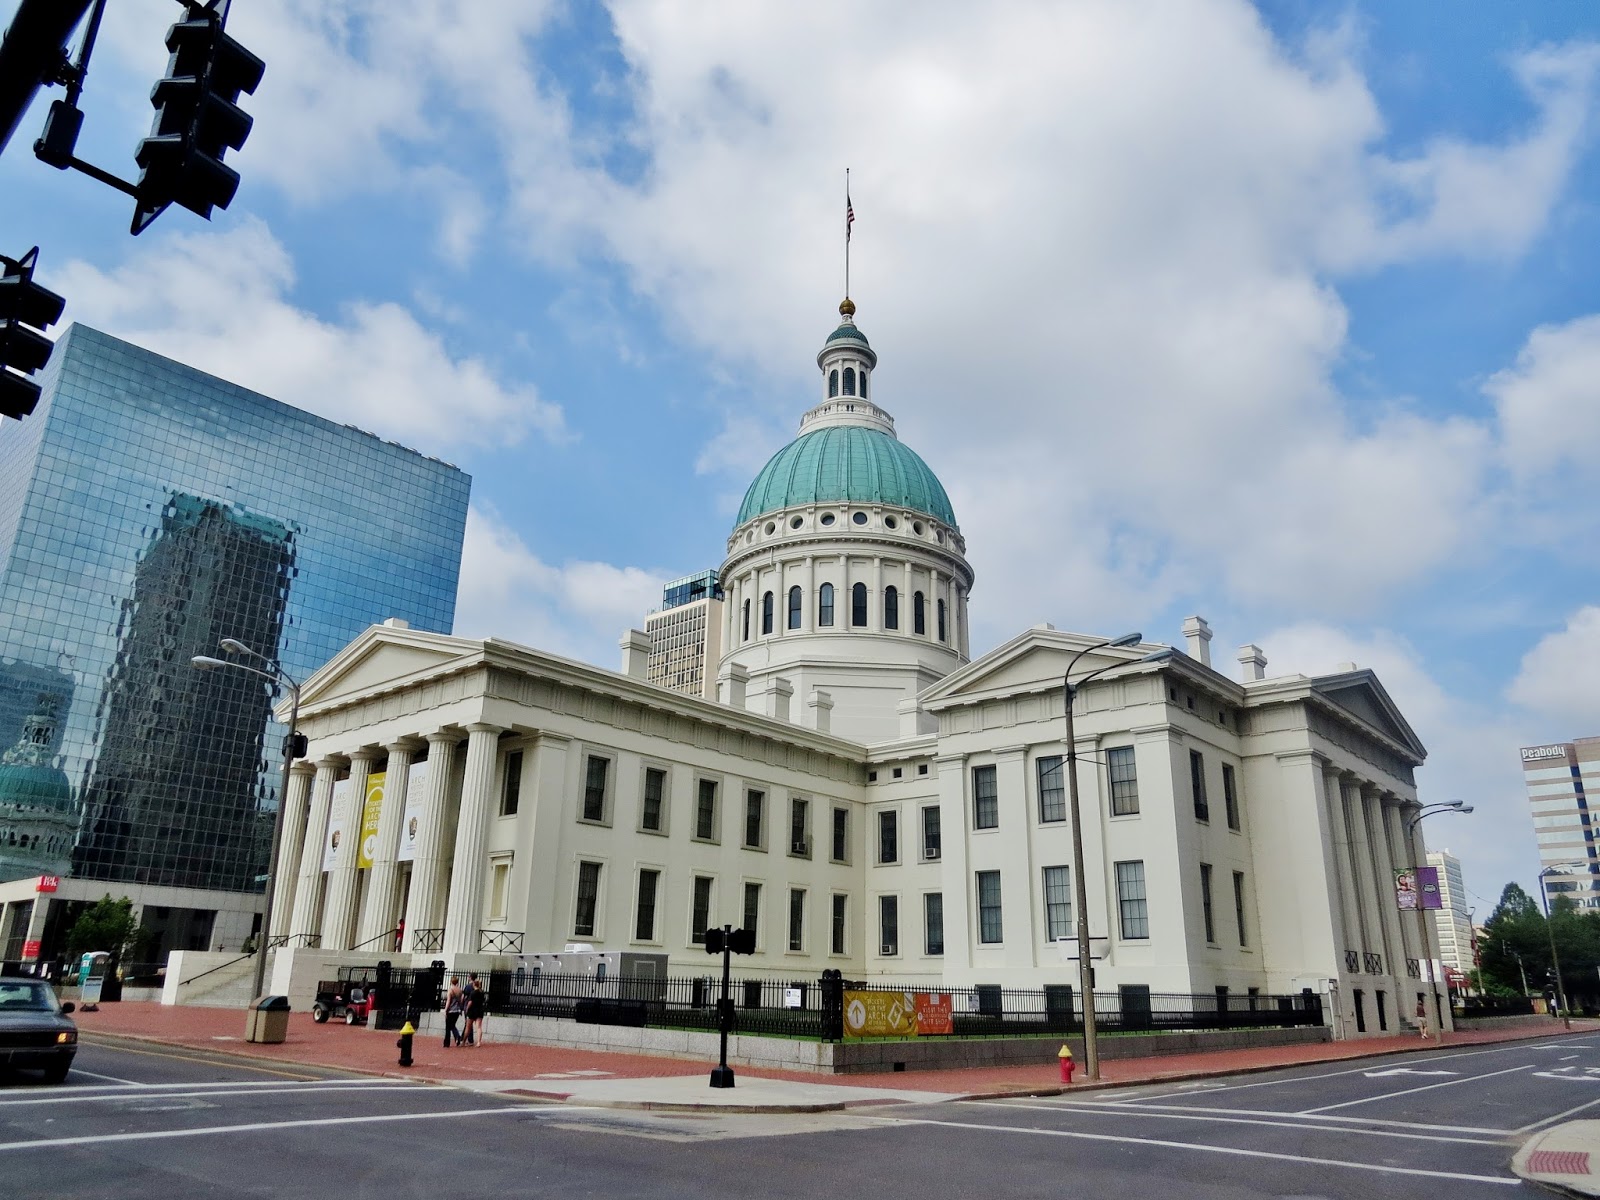 Liberty or Death: St. Louis Old Courthouse